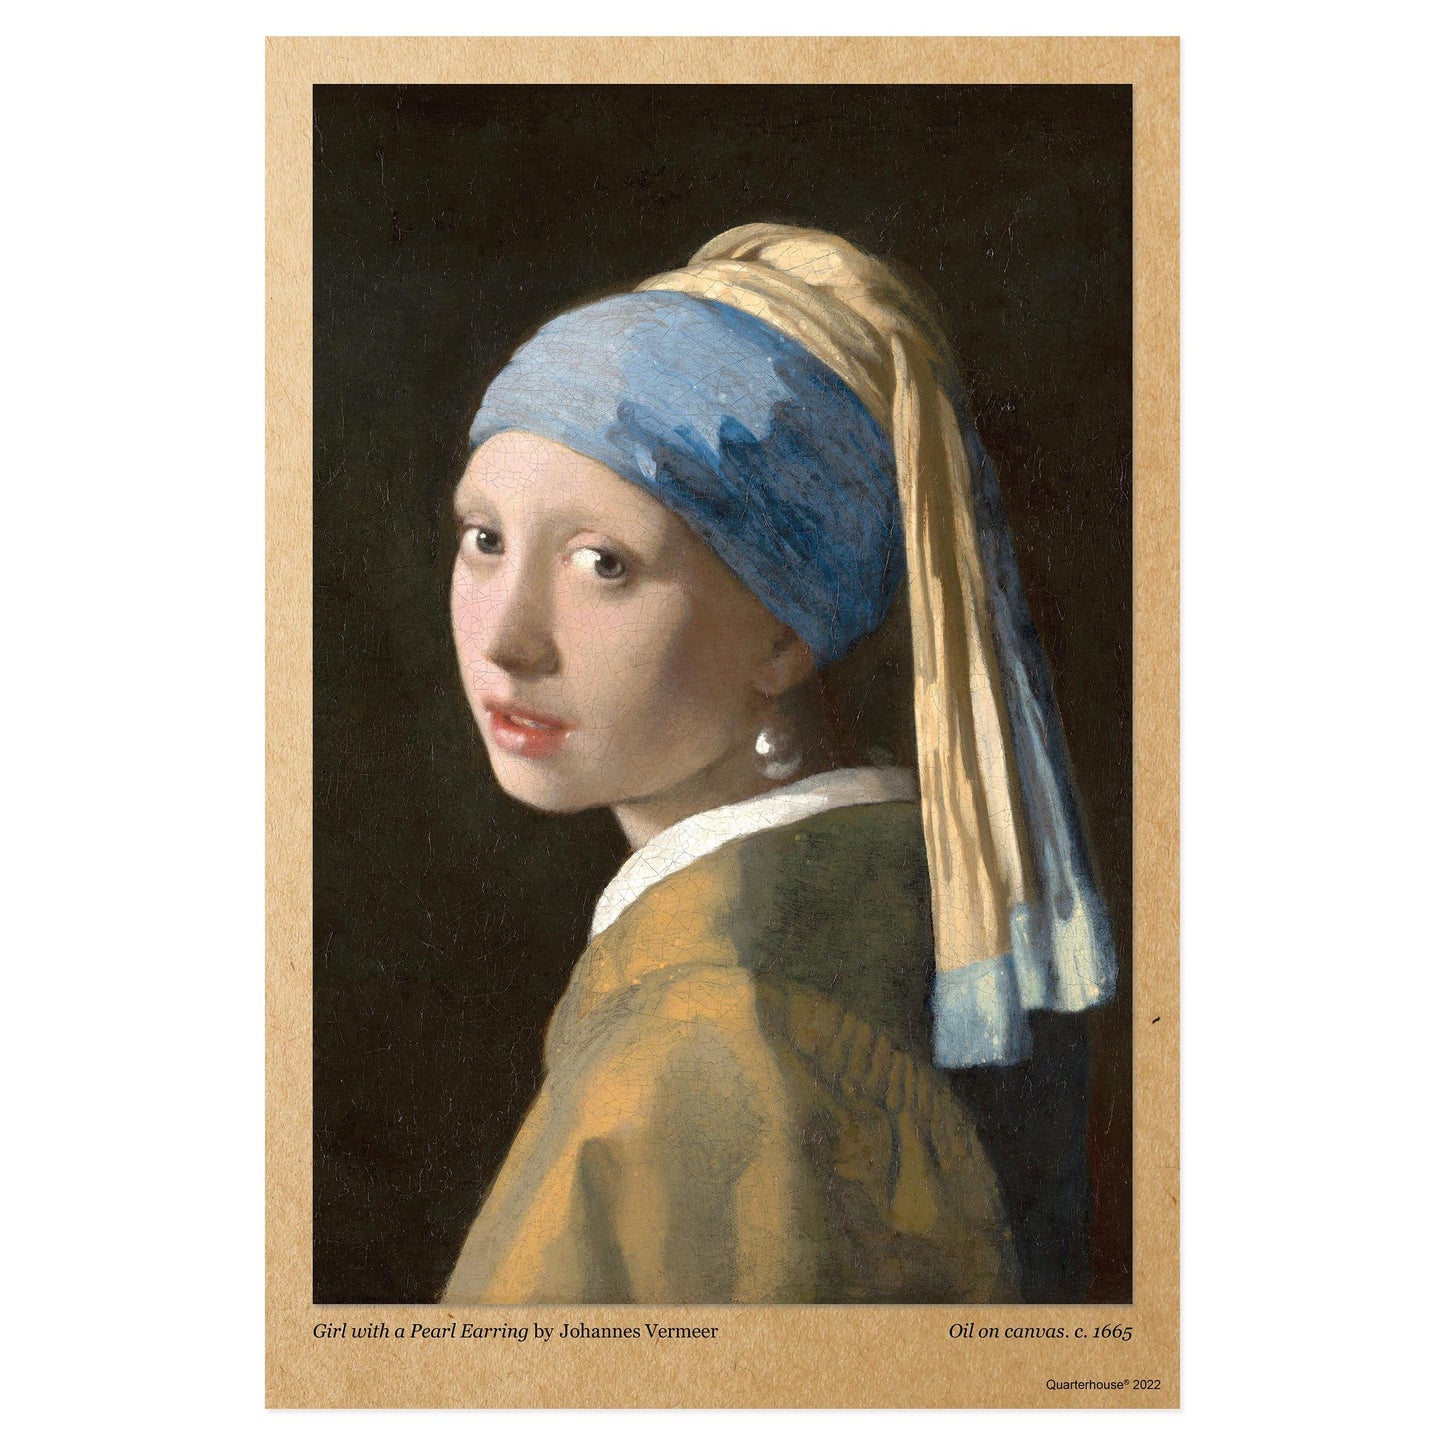 Quarterhouse 'Girl with a Pearl Earring' Poster, Art History Classroom Materials for Teachers